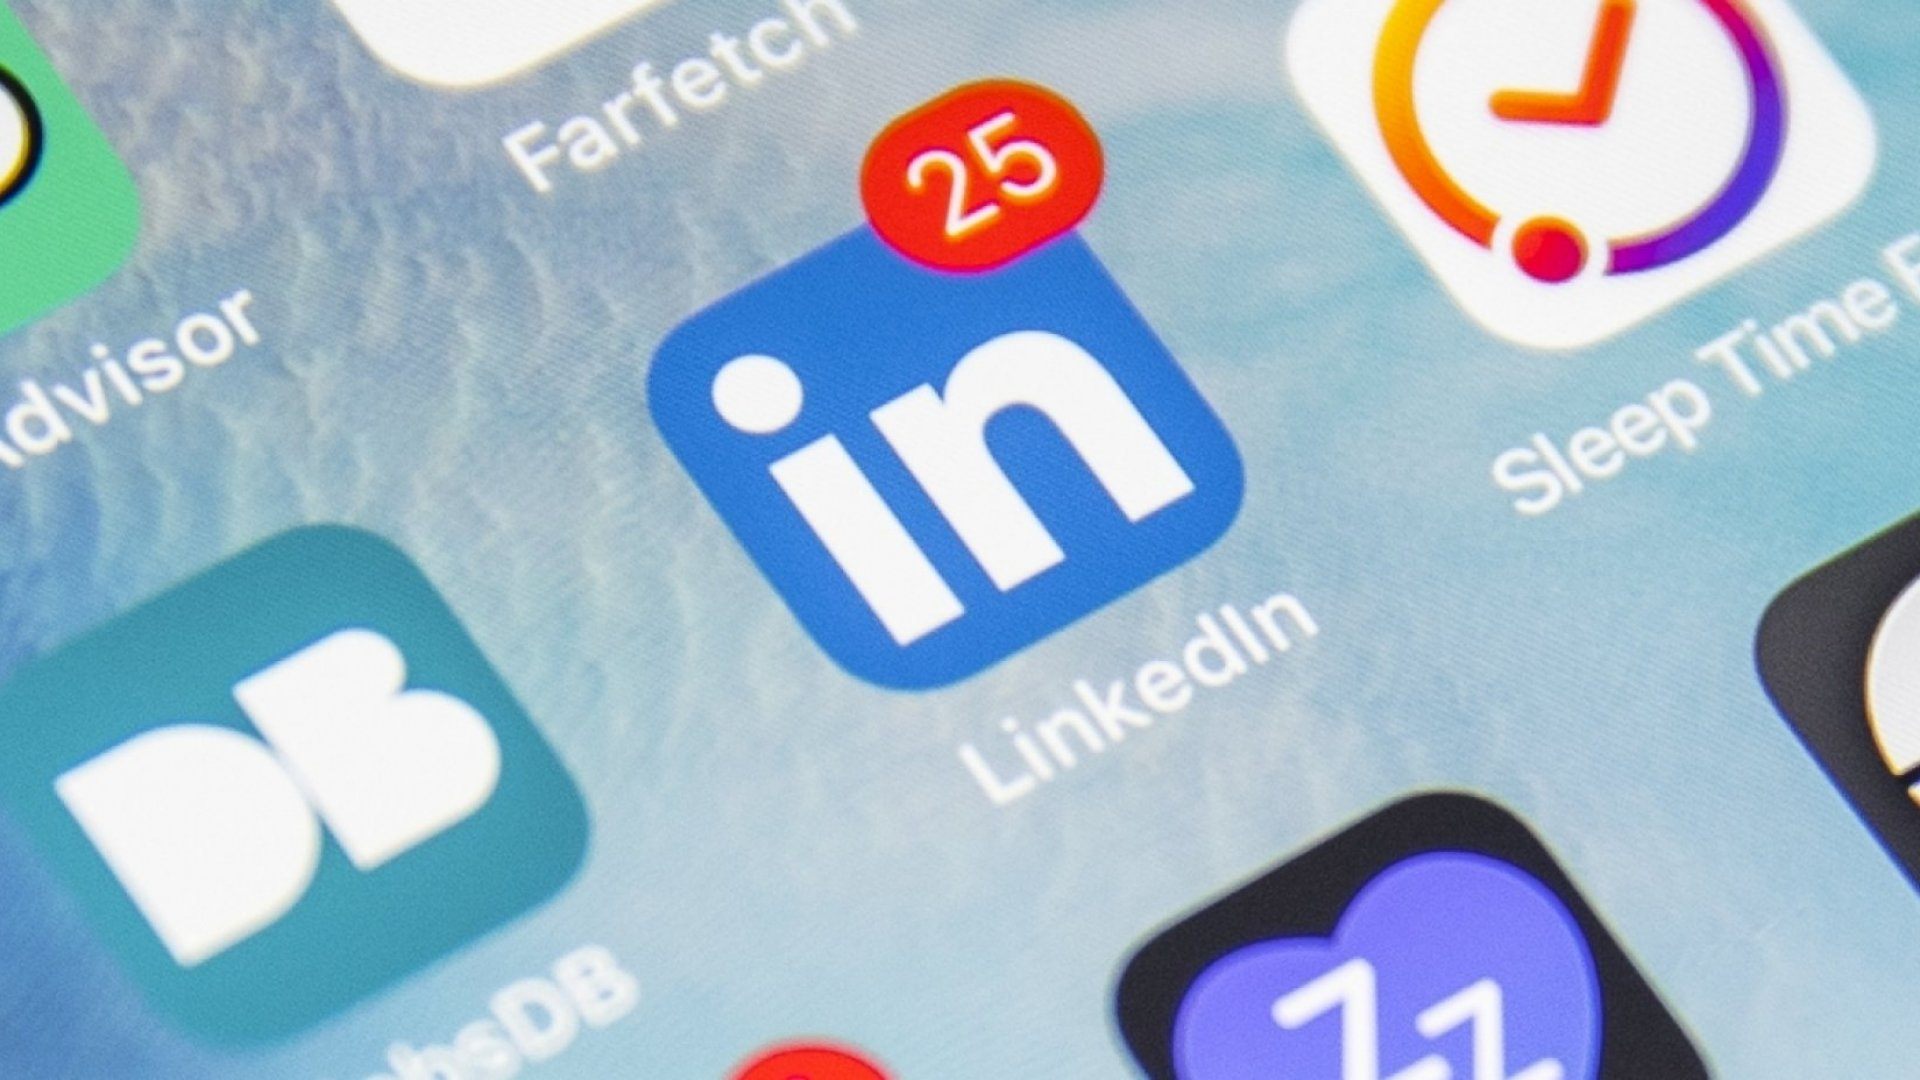 Generate A Professional Network With The LinkedIn App